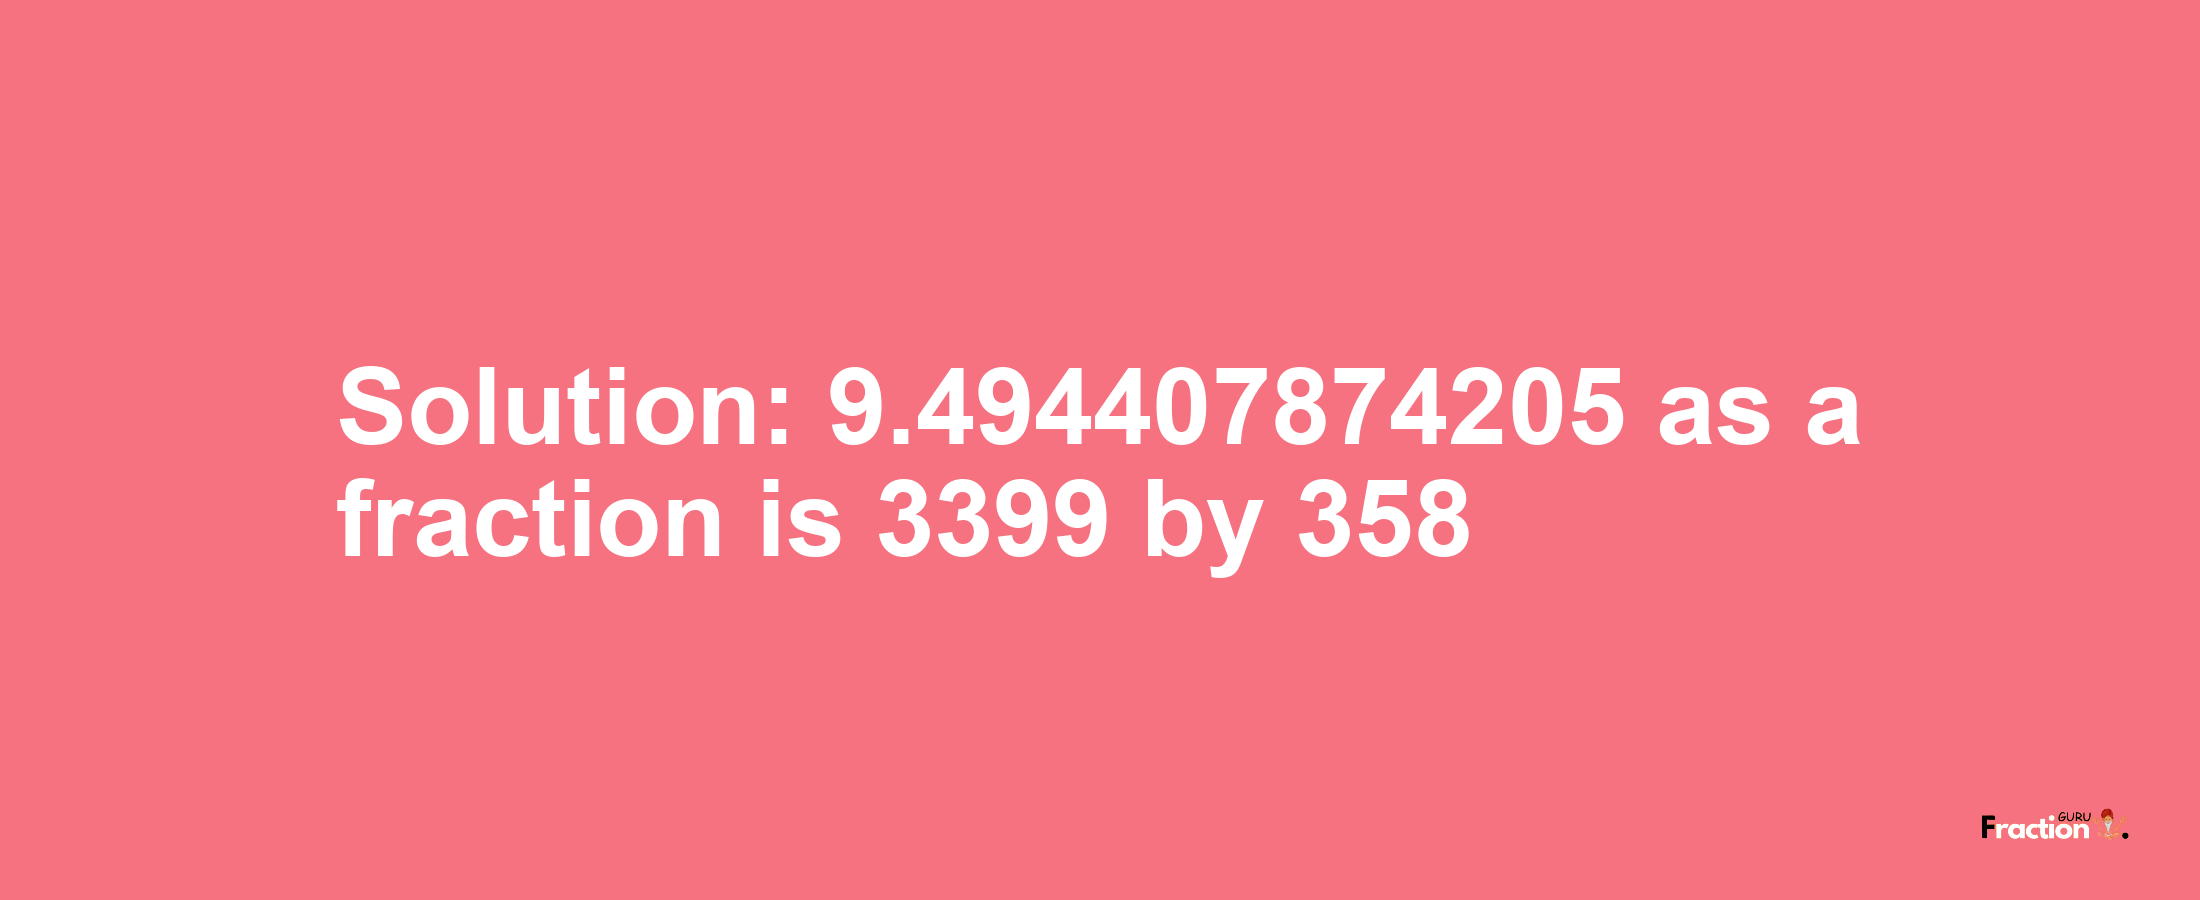 Solution:9.494407874205 as a fraction is 3399/358